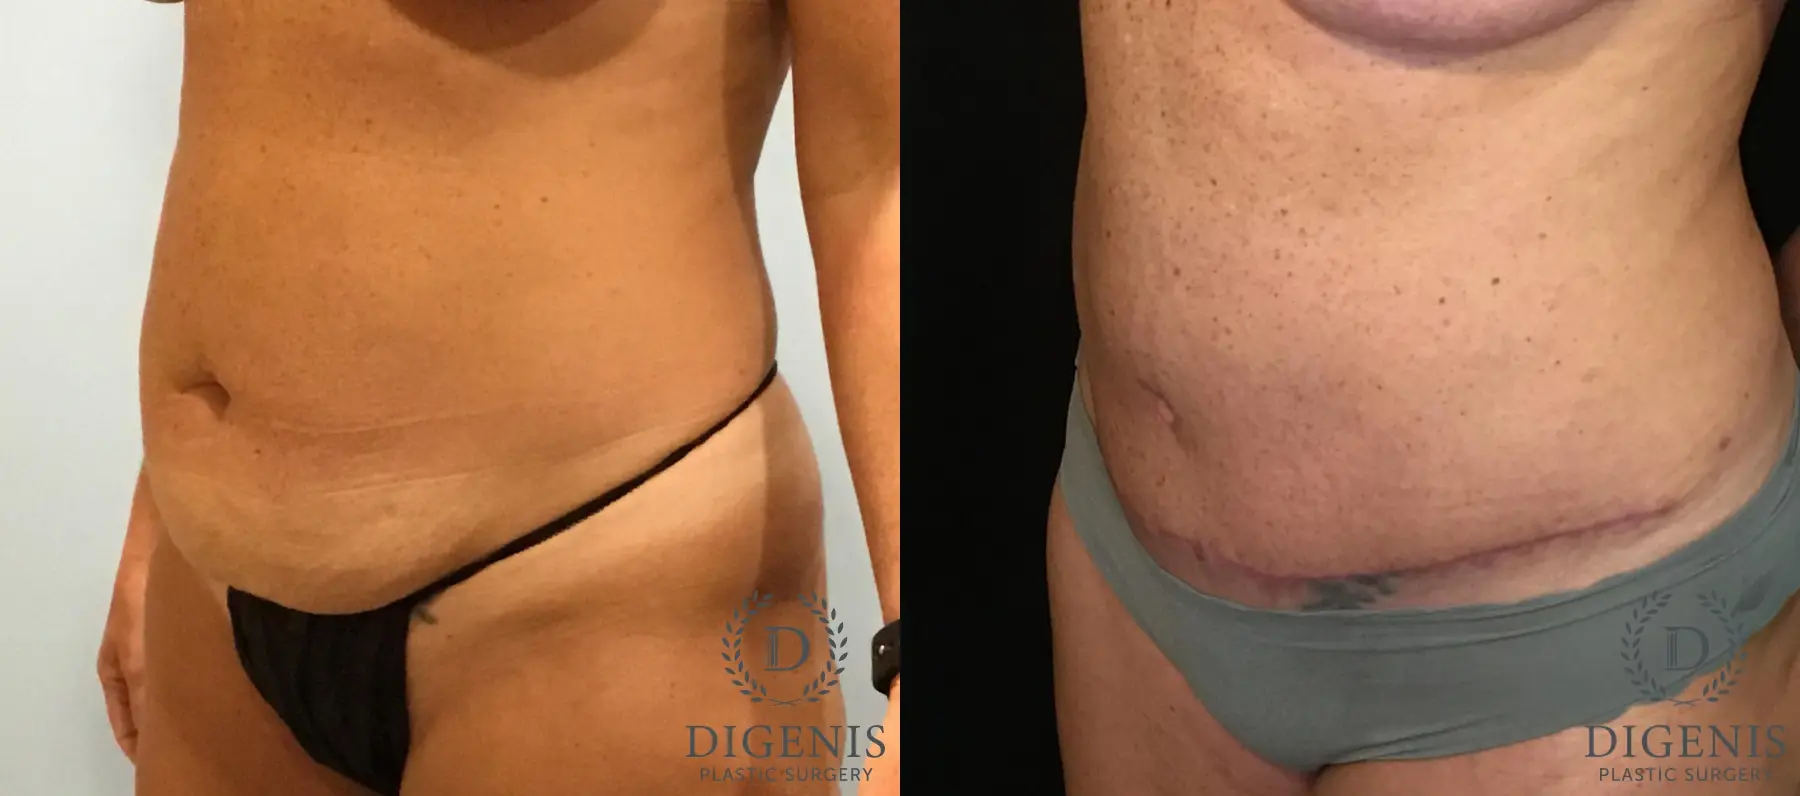 Abdominoplasty: Patient 4 - Before and After 4